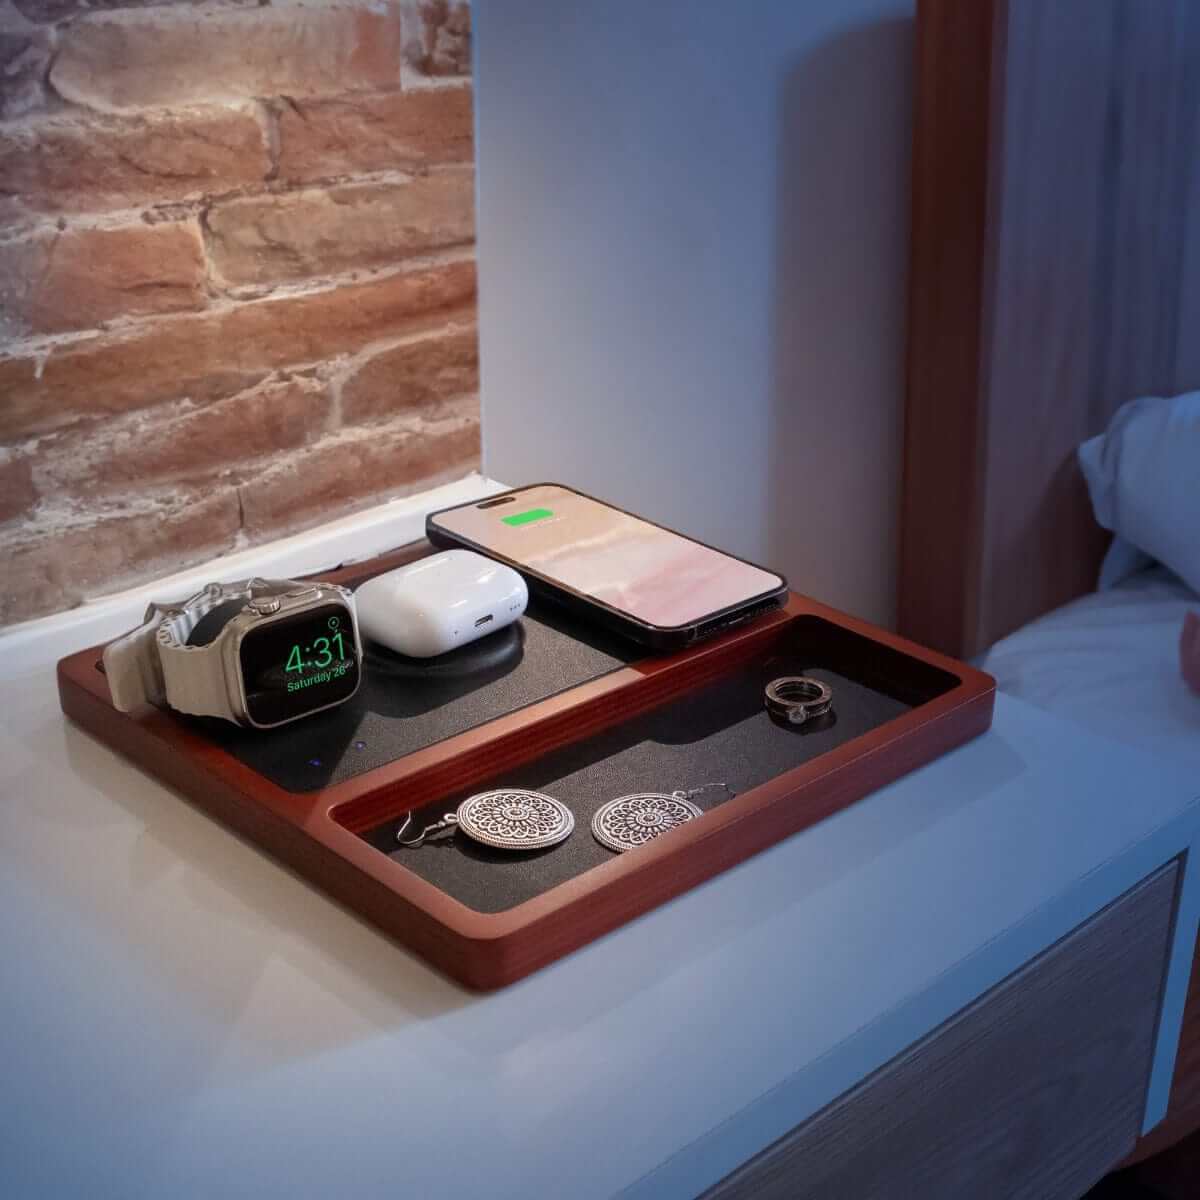 TRIO TRAY Black - 3-in-1 MagSafe Oak Wireless Charger with Apple Watch Support